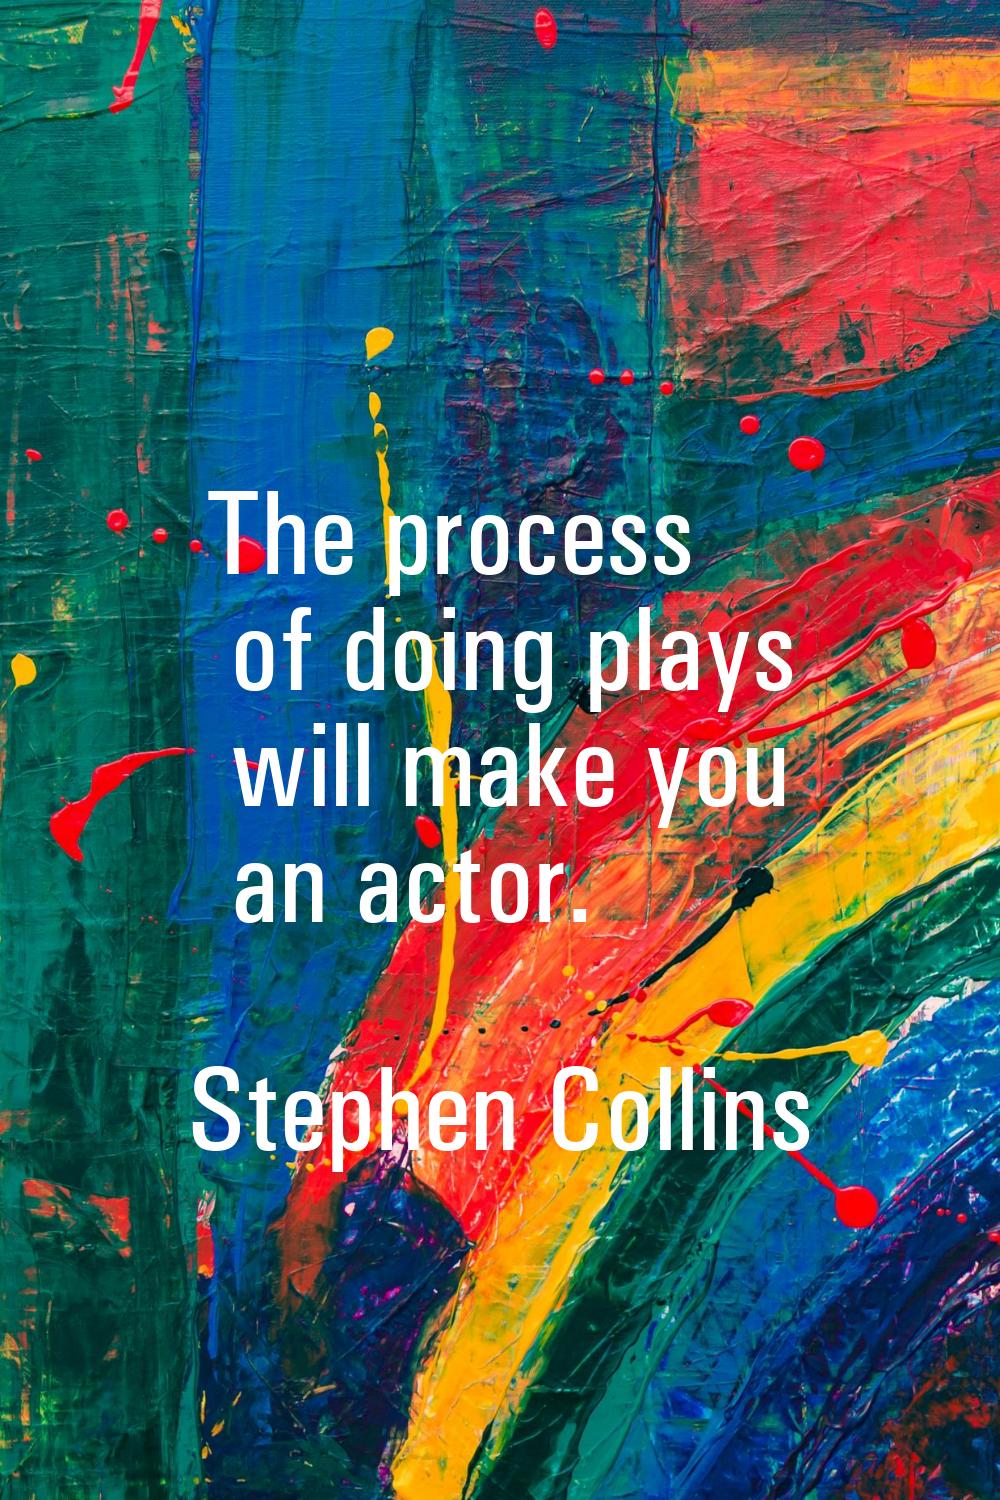 The process of doing plays will make you an actor.